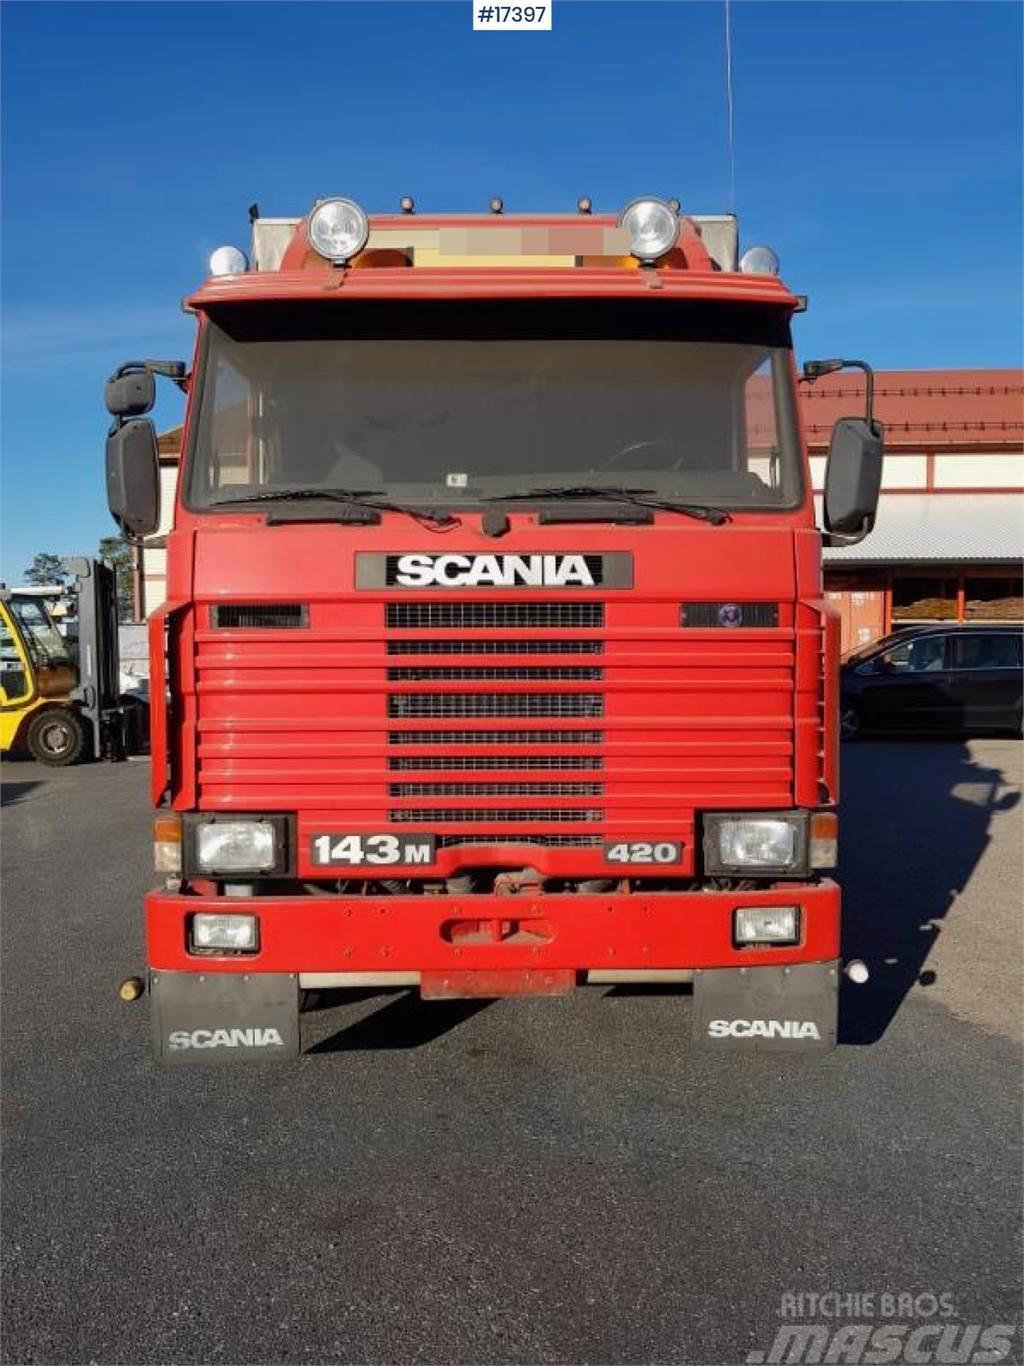 Scania 143M w/ rear mounted Hiab 105-3 crane from 1996 Truck mounted cranes